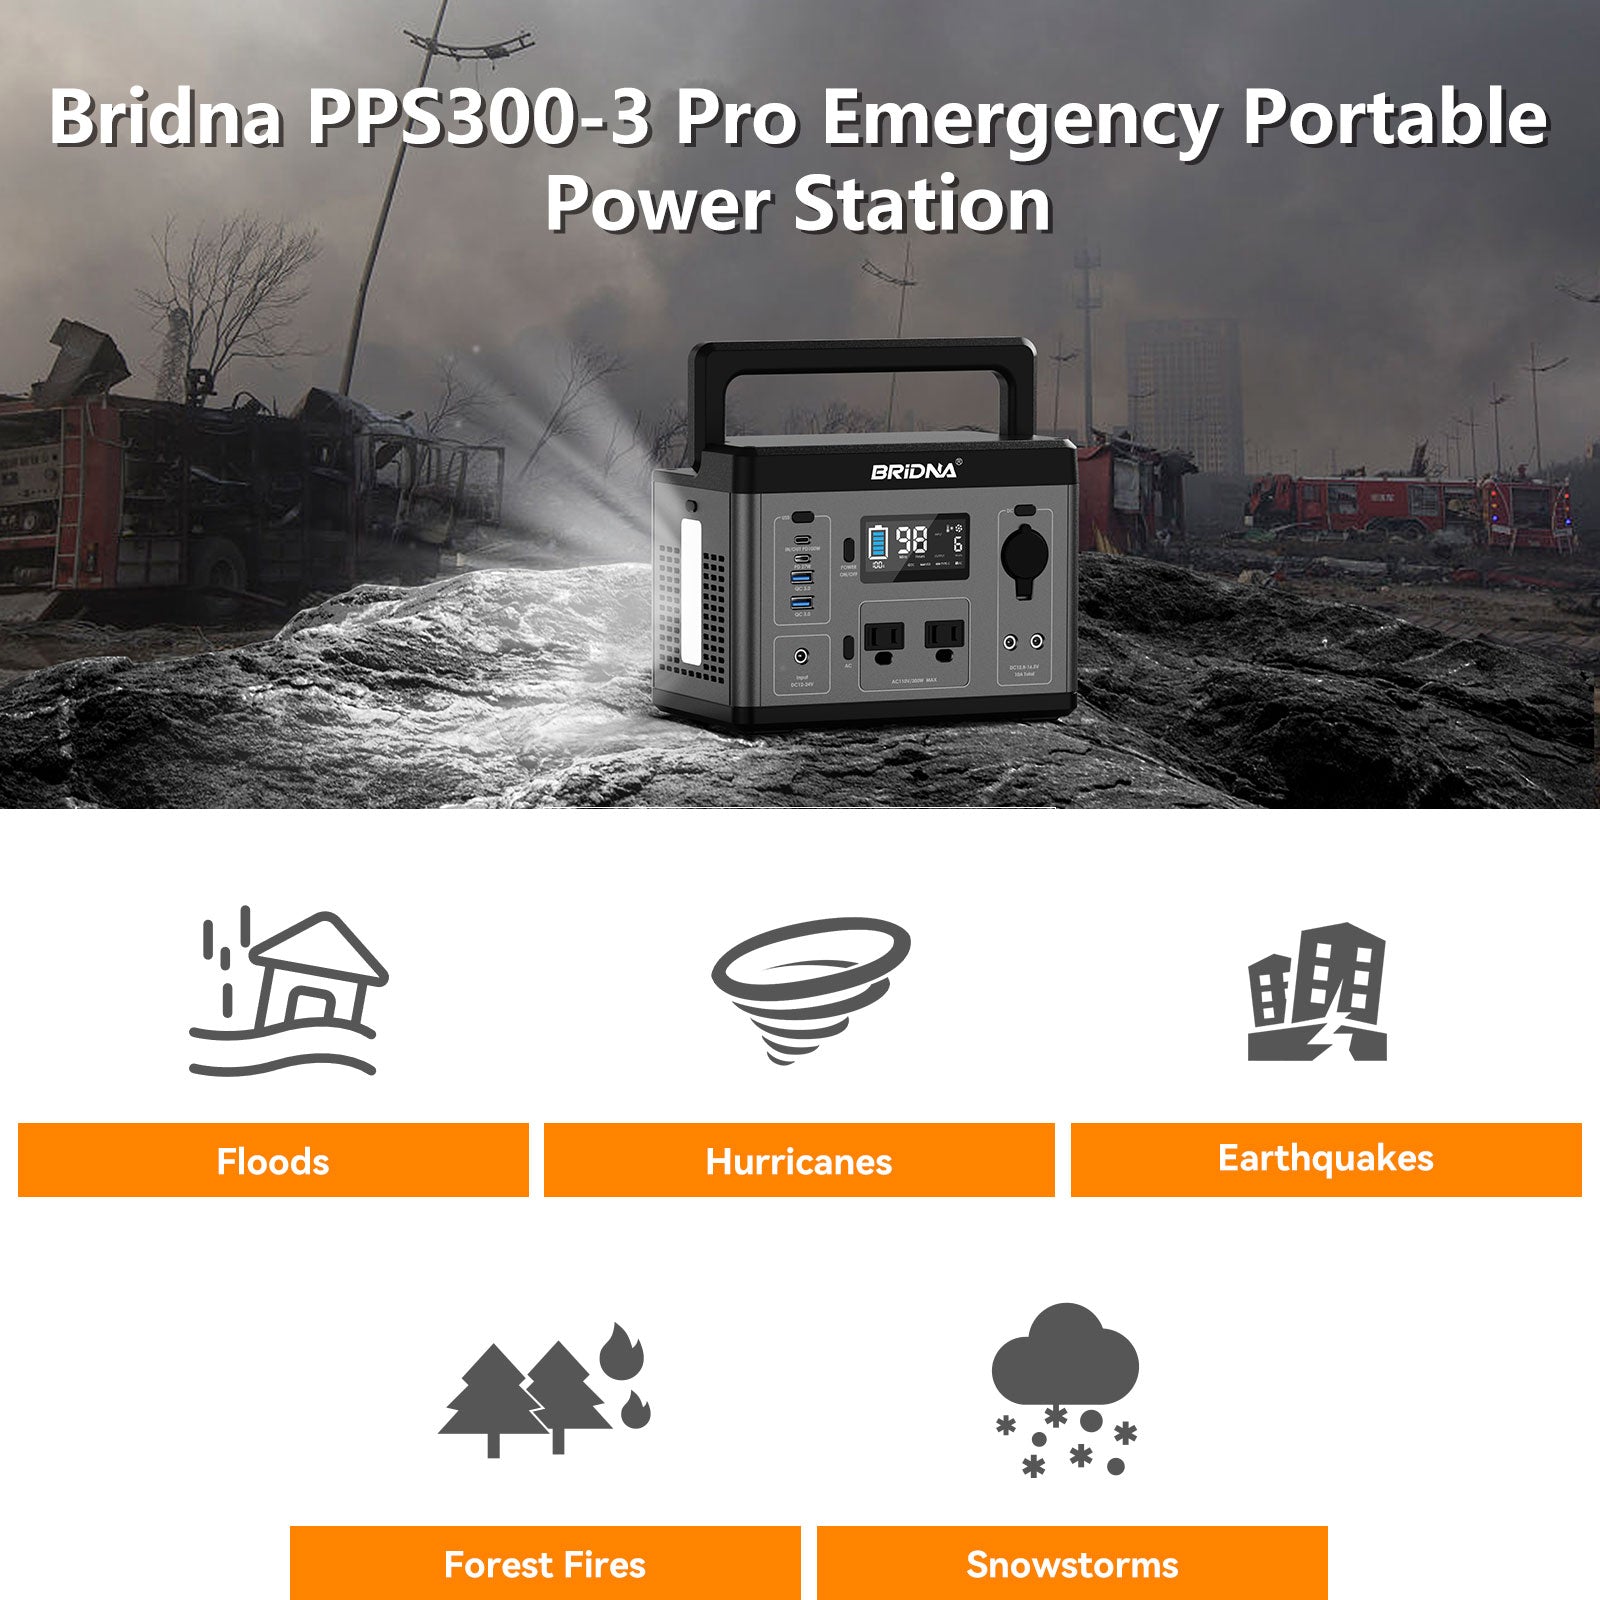 BRIDNA PPS300-3 Pro Portable Power Station for Emergency Outage